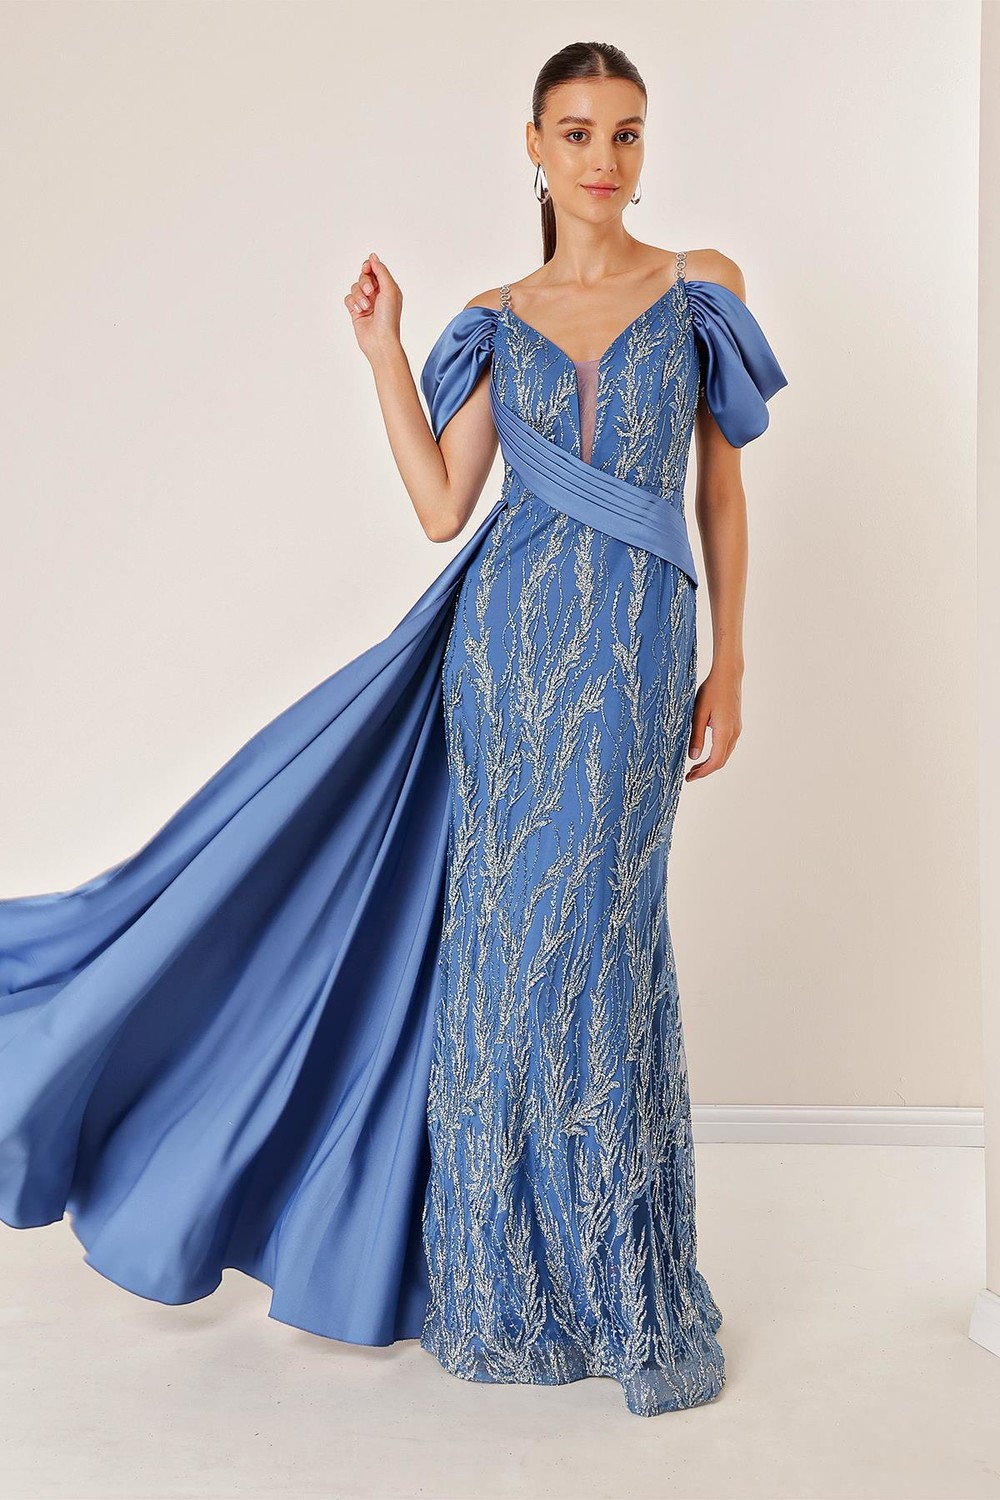 By Saygı Chain Straps Front Back V-Neck Low Sleeve Glittery Flocked Printed Lined Long Mermaid Dress INDIGO